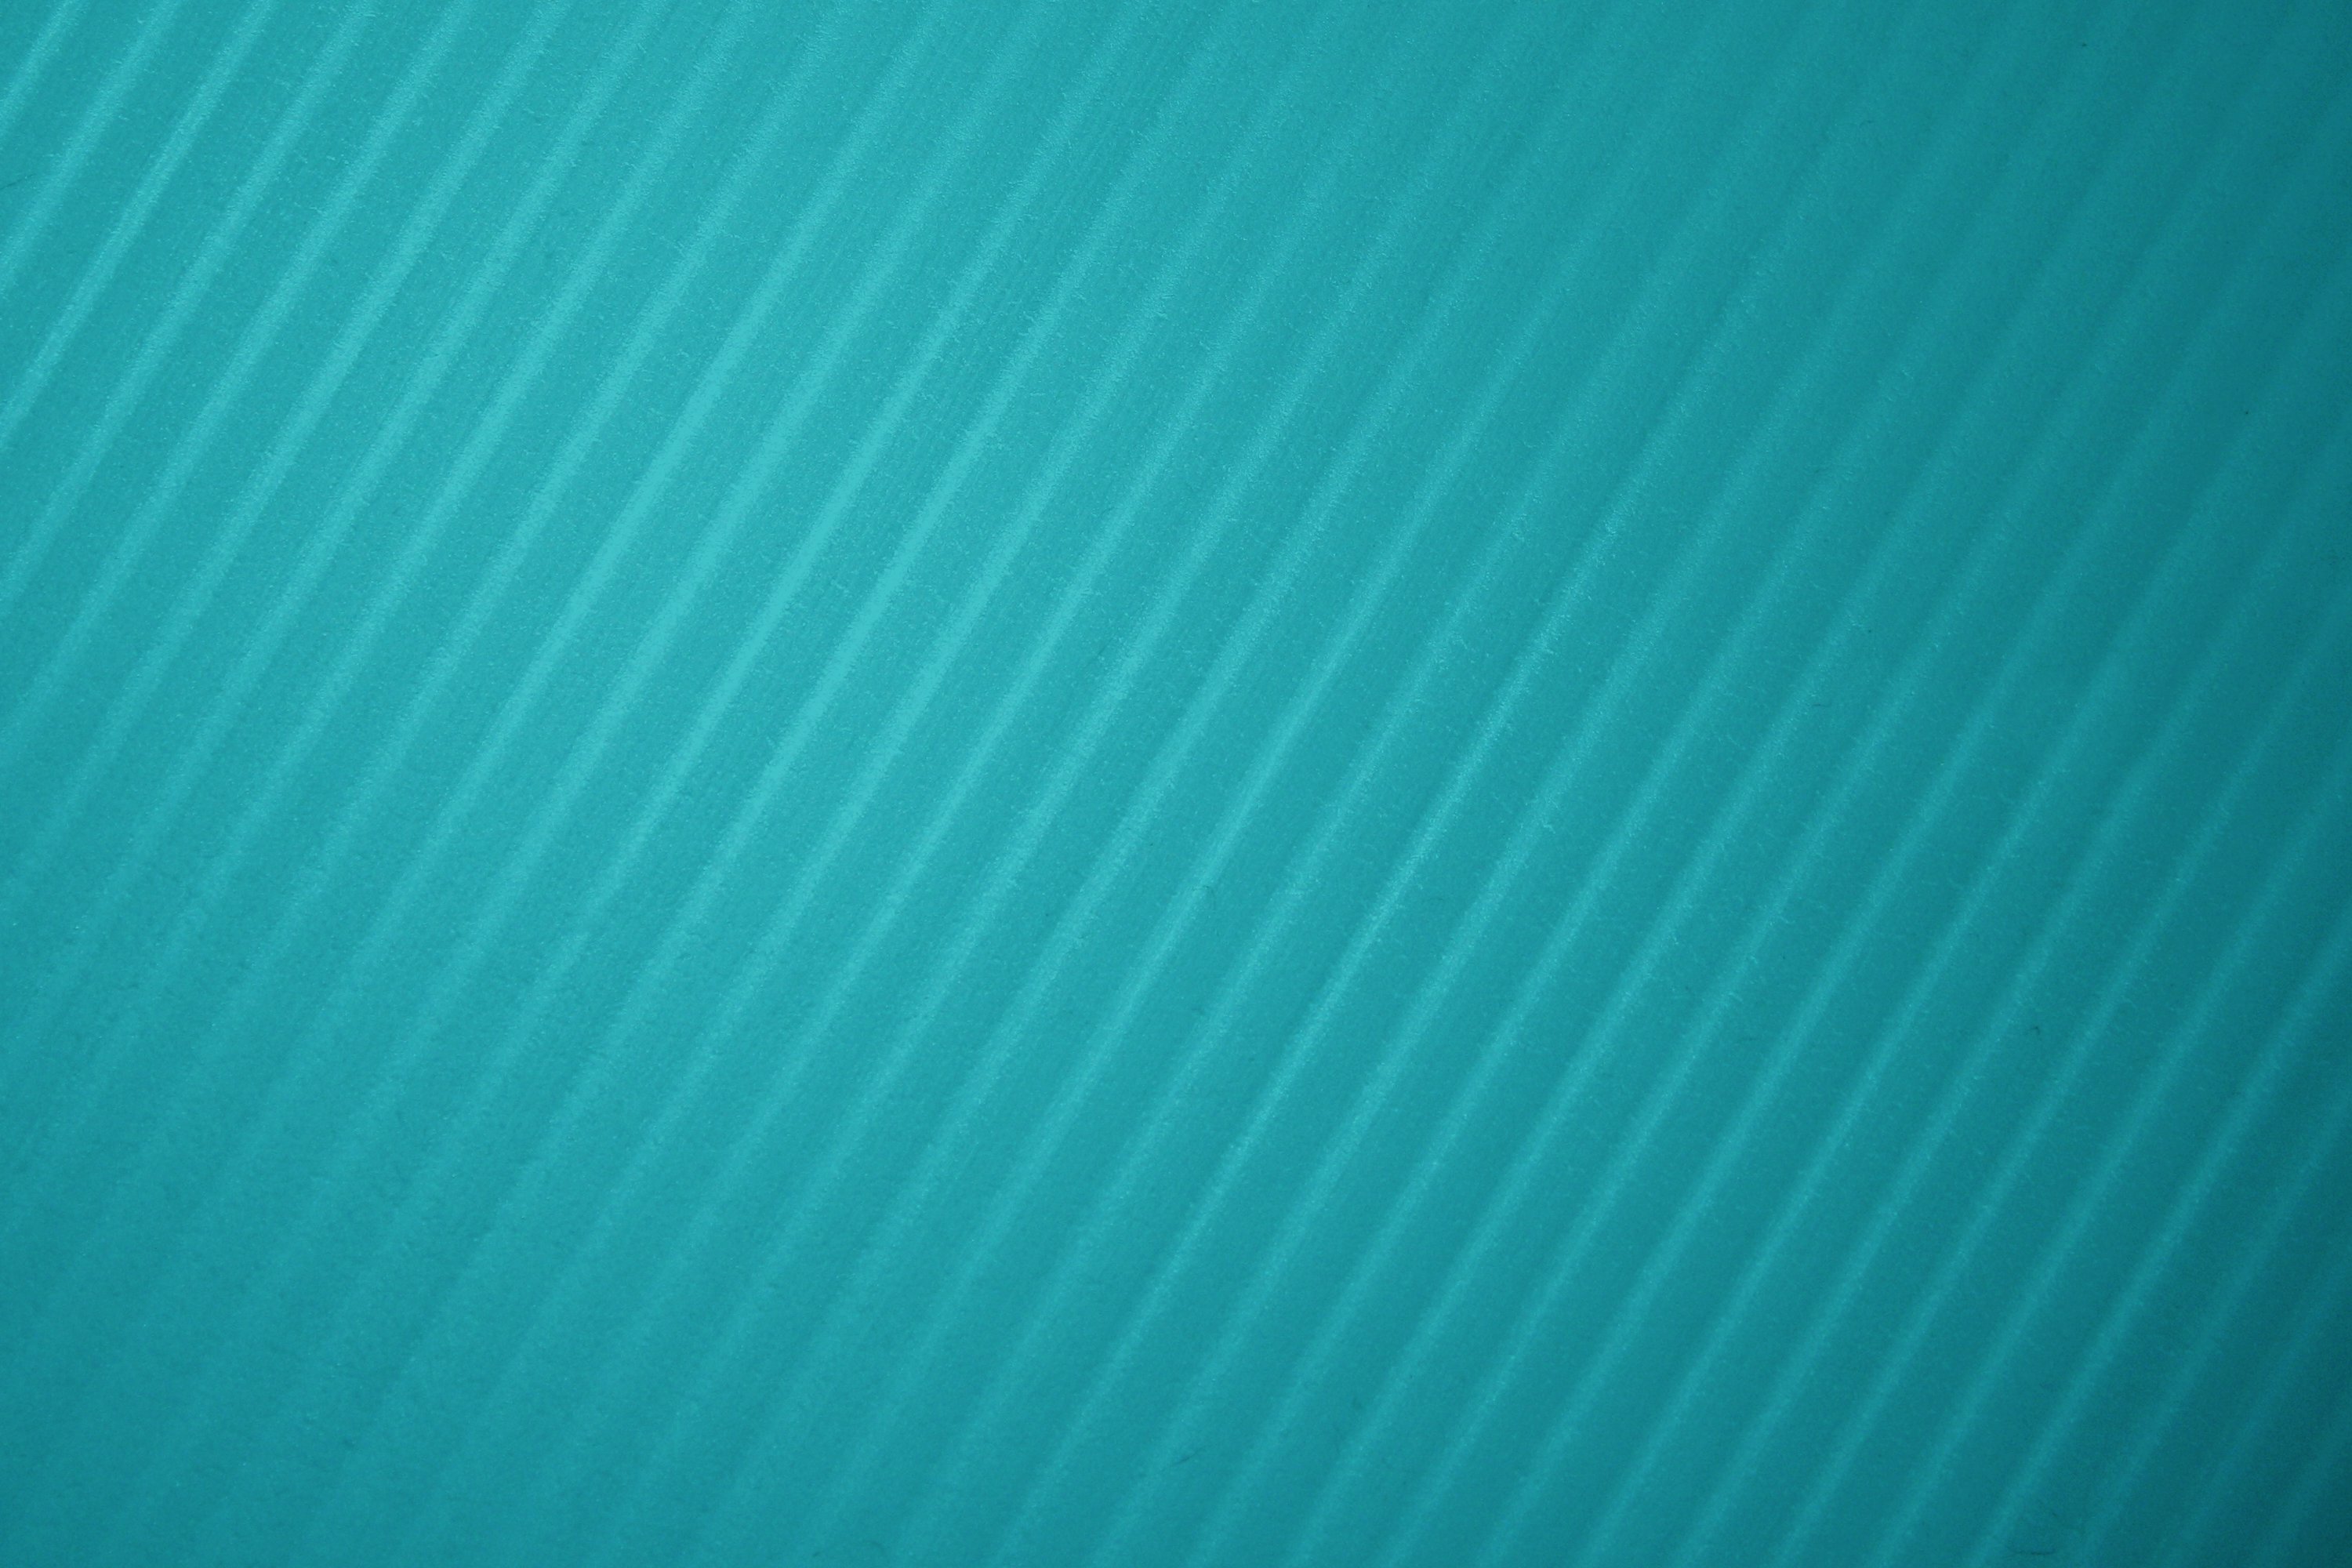 Teal Diagonal Striped Plastic Texture Free High Resolution Photo